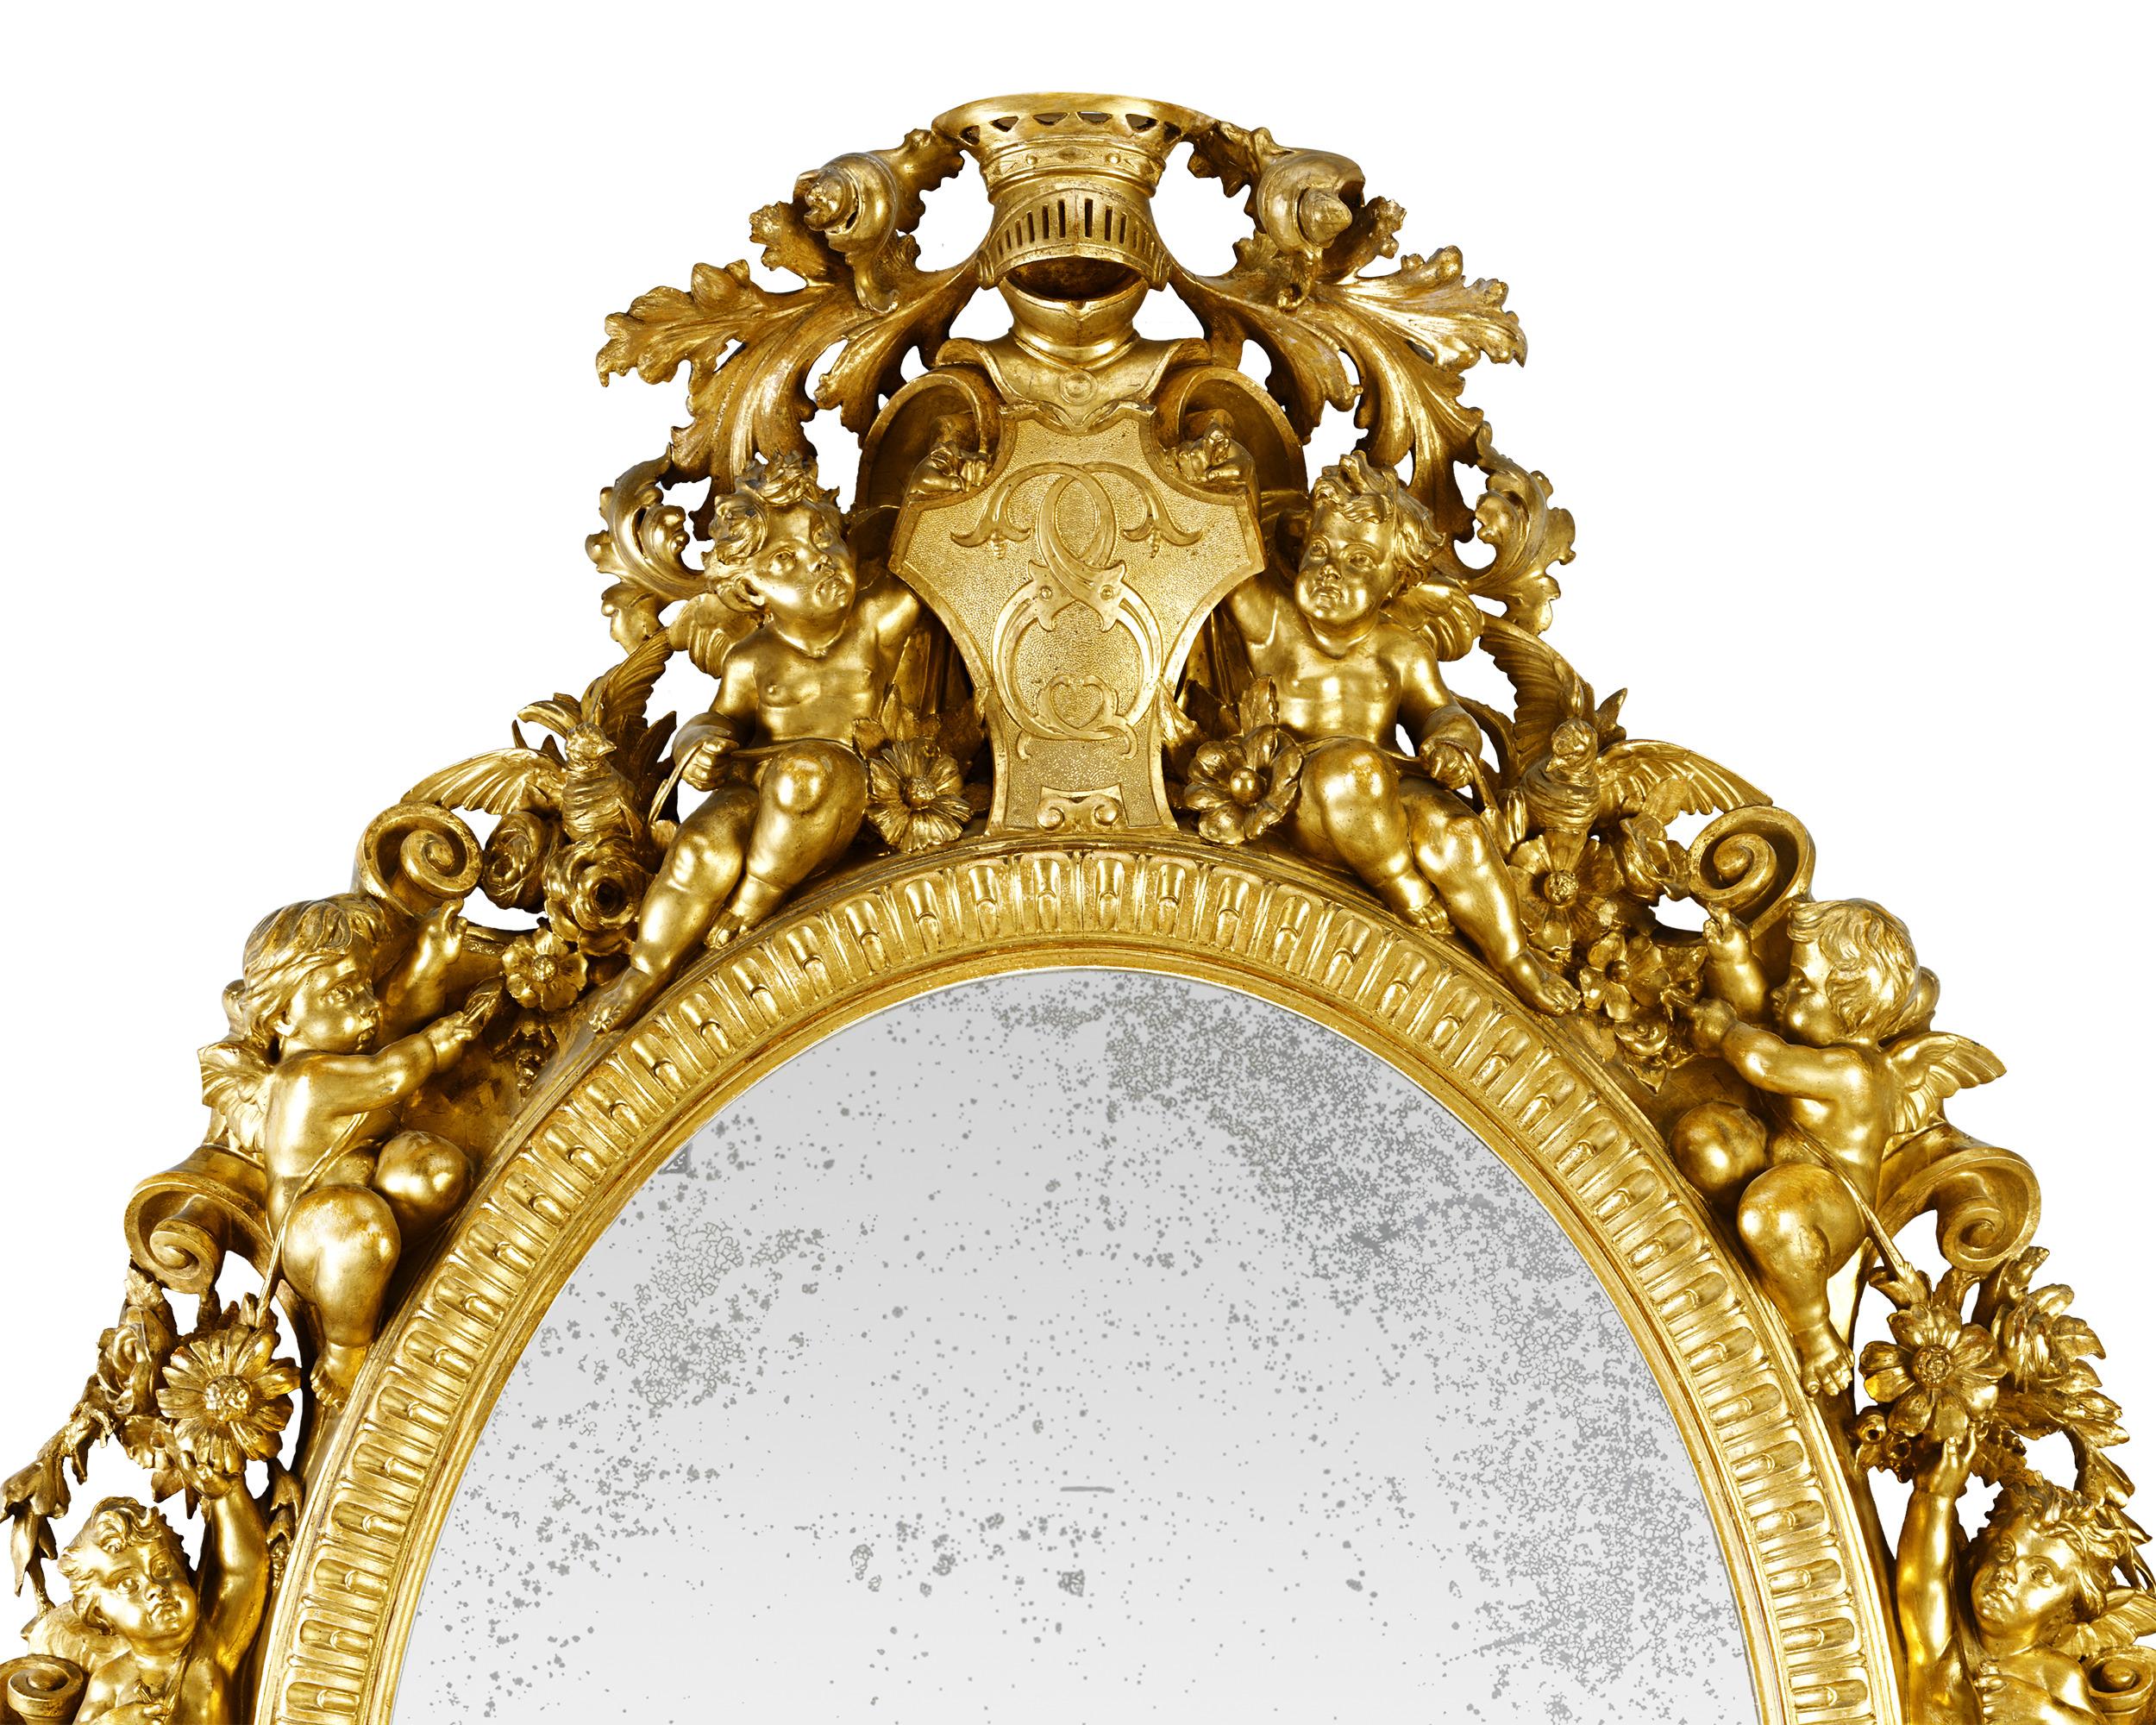 The exquisite details of this hand carved Italian mirror are matched in grandeur by its monumental size. At over 6 feet tall and 4 feet wide, this mirror is an extraordinary feast for the eyes. Also known as a “glace en bois doré,” this 18th-century